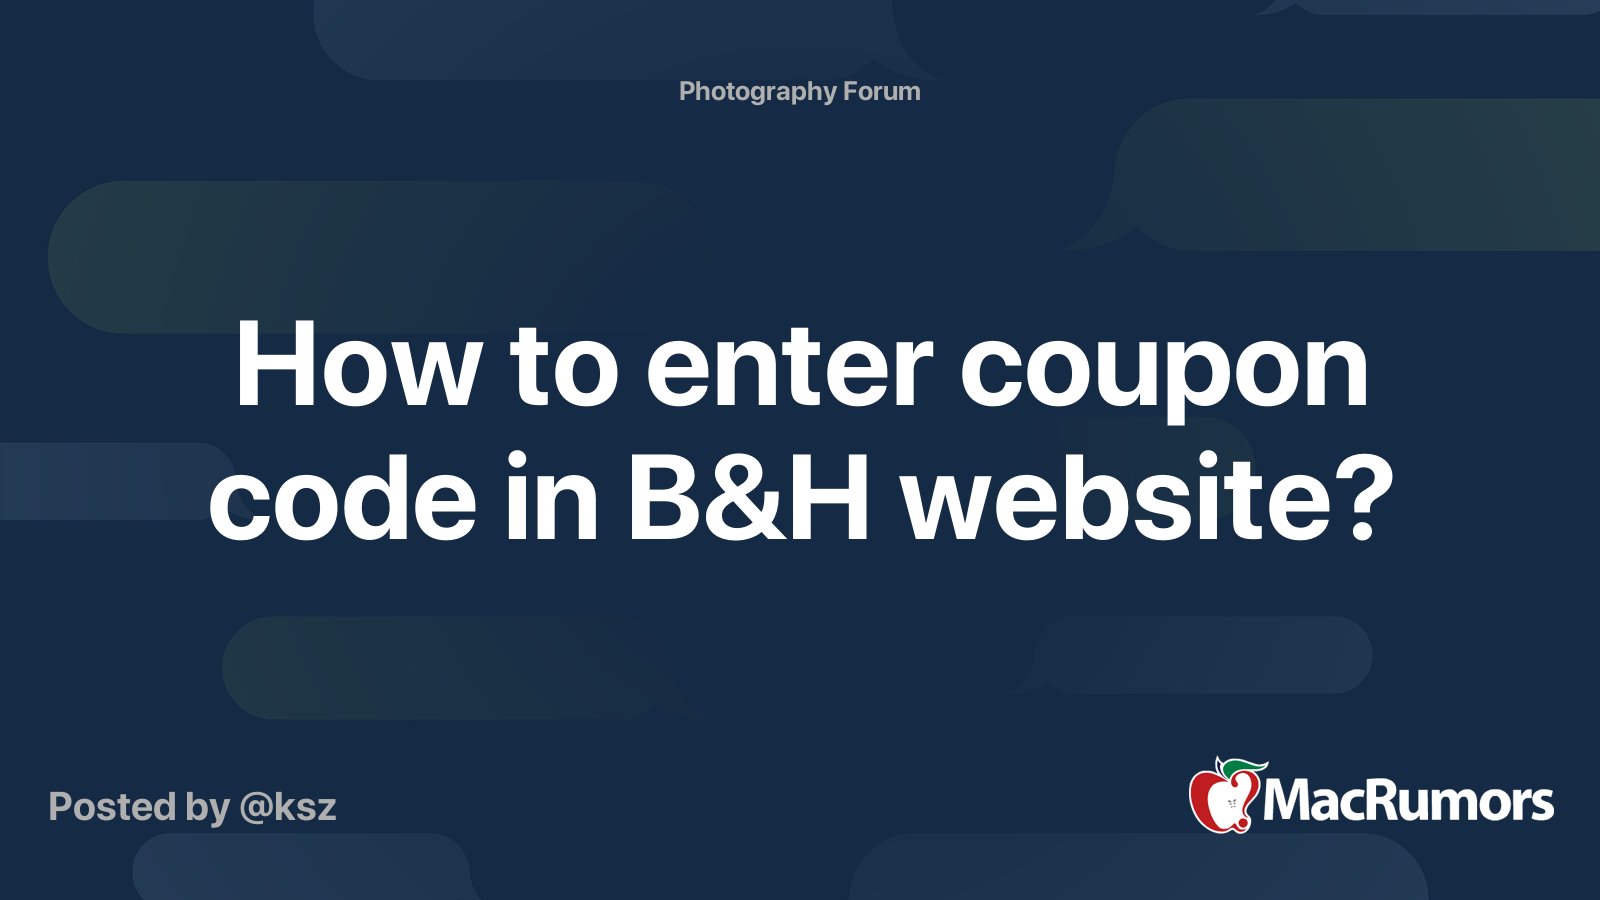 how-to-enter-coupon-code-in-b-h-website-macrumors-forums